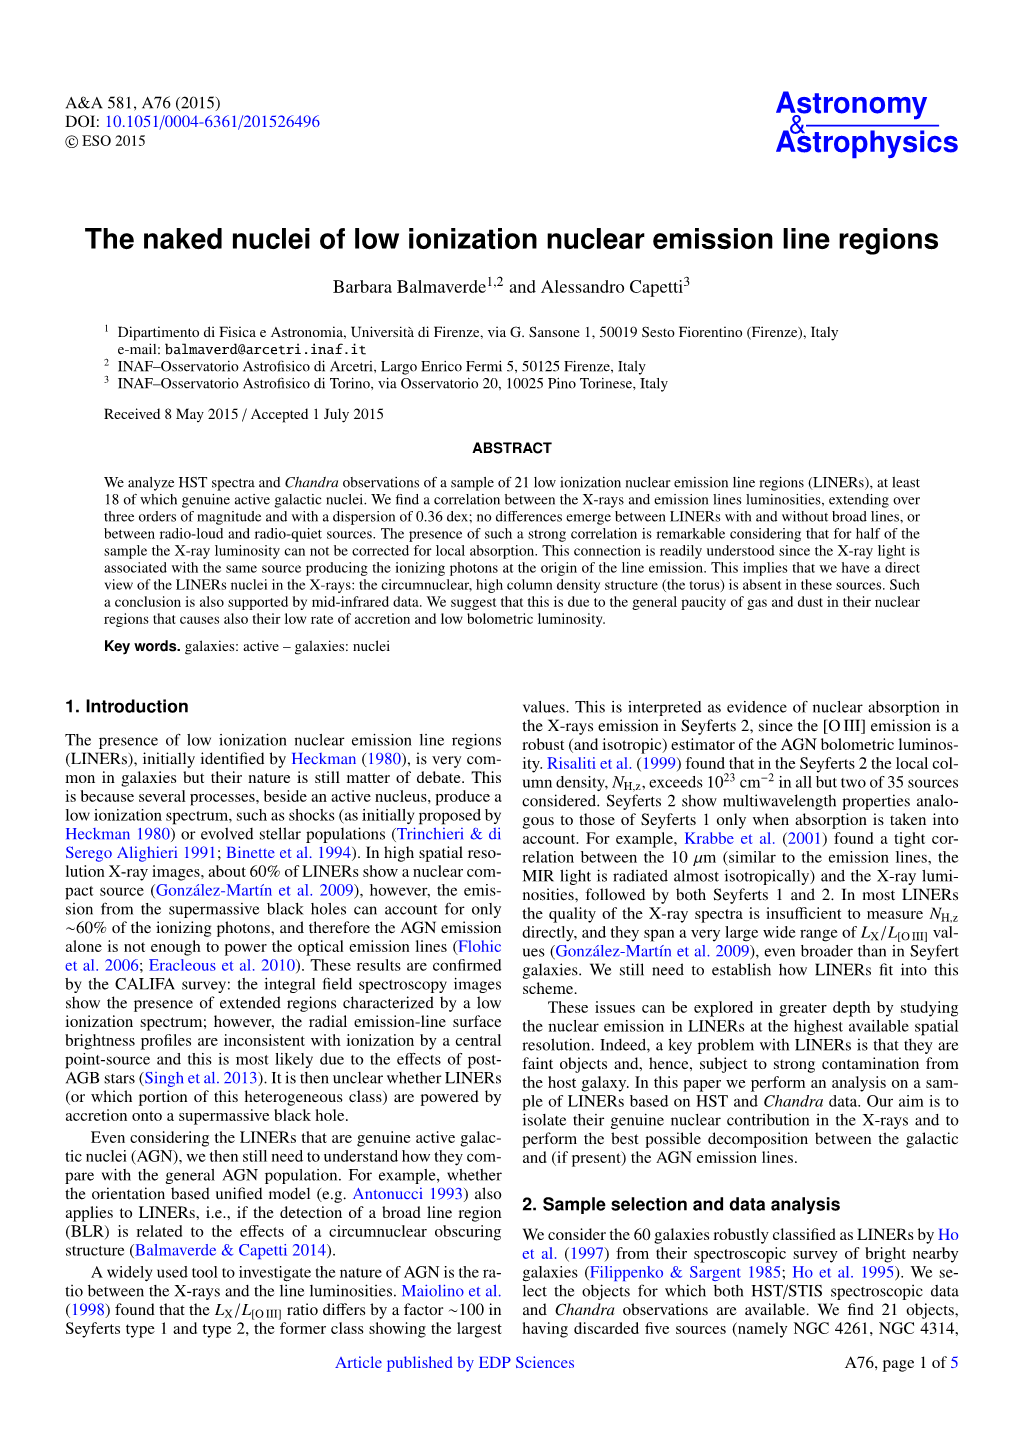 The Naked Nuclei of Low Ionization Nuclear Emission Line Regions